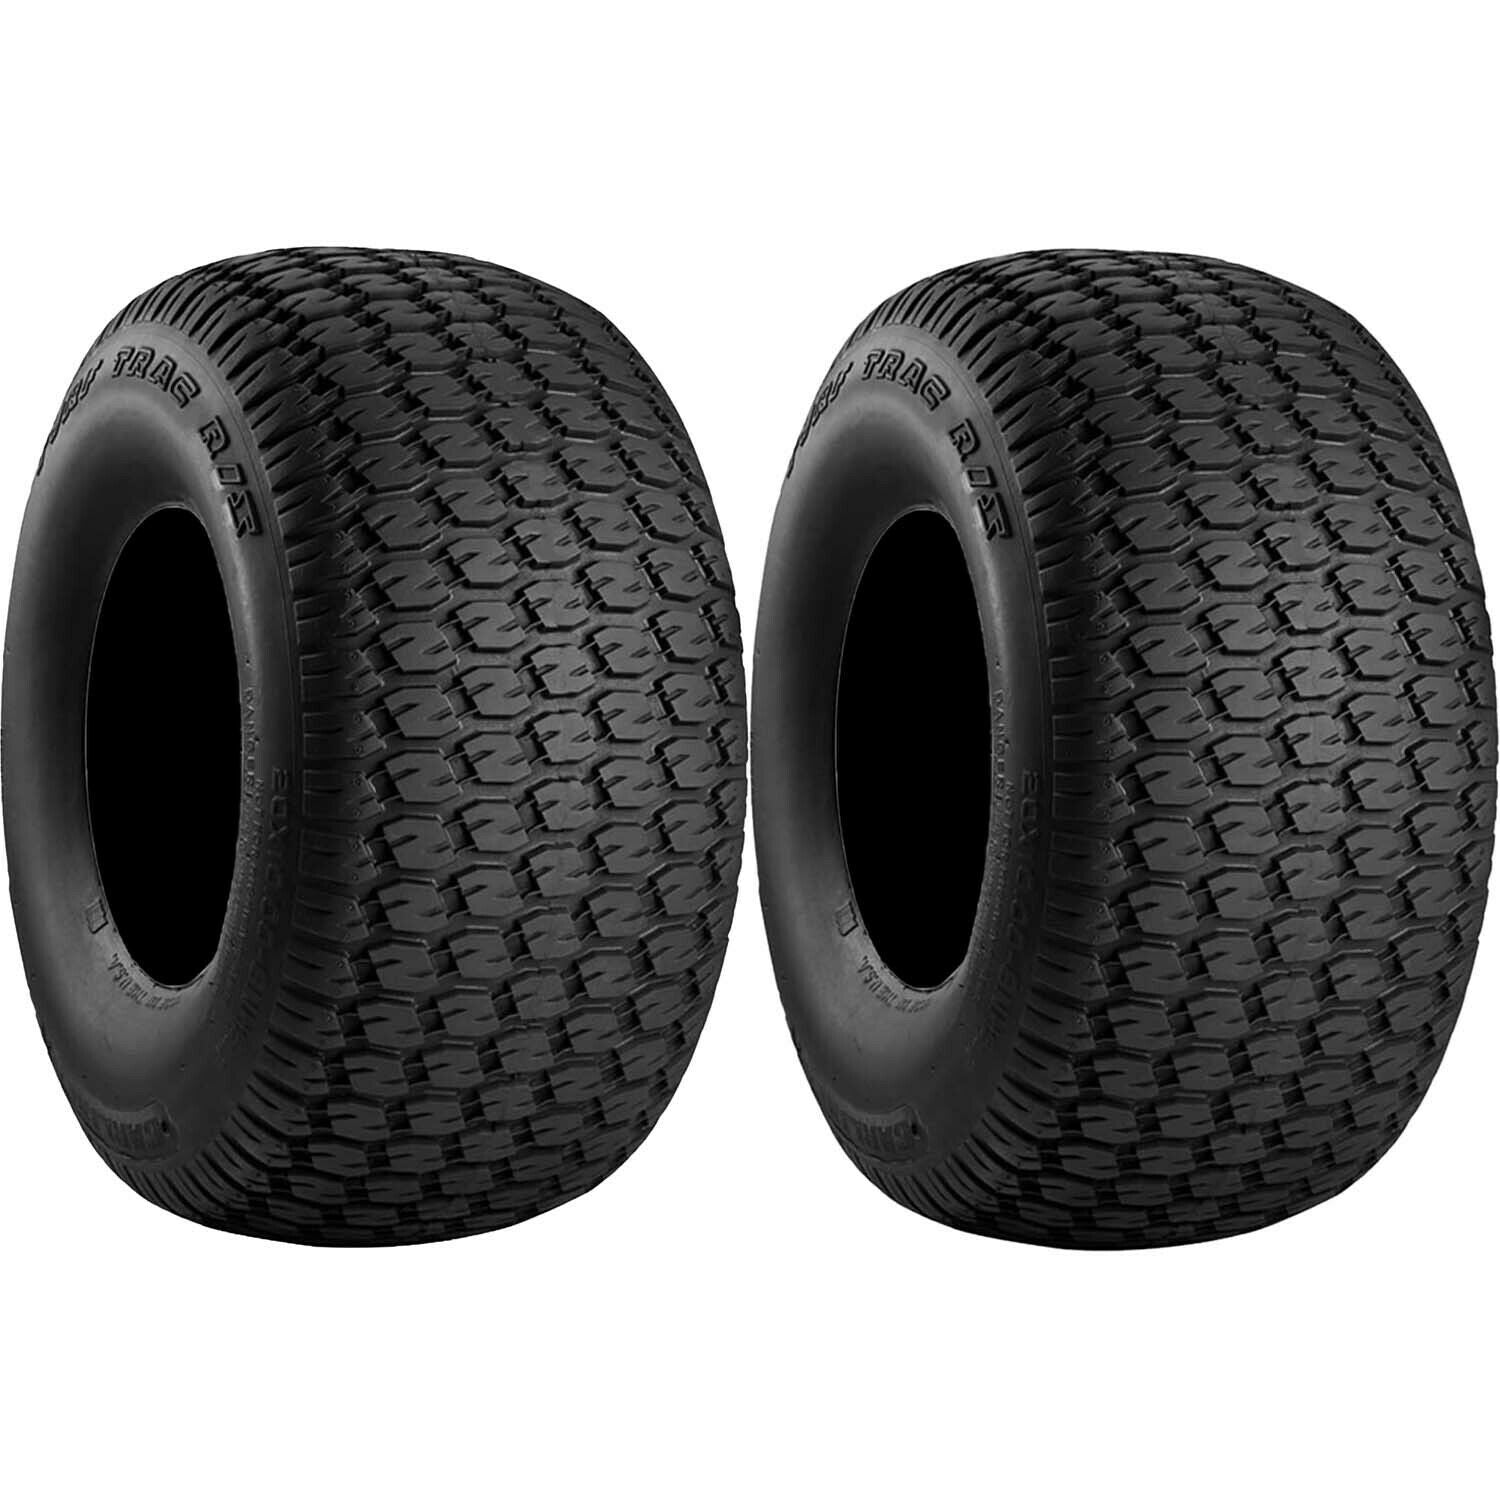 Carlisle Turf Trac R/S Lawn and Garden Tire 4Ply 20x10.00-10 Pack of 2